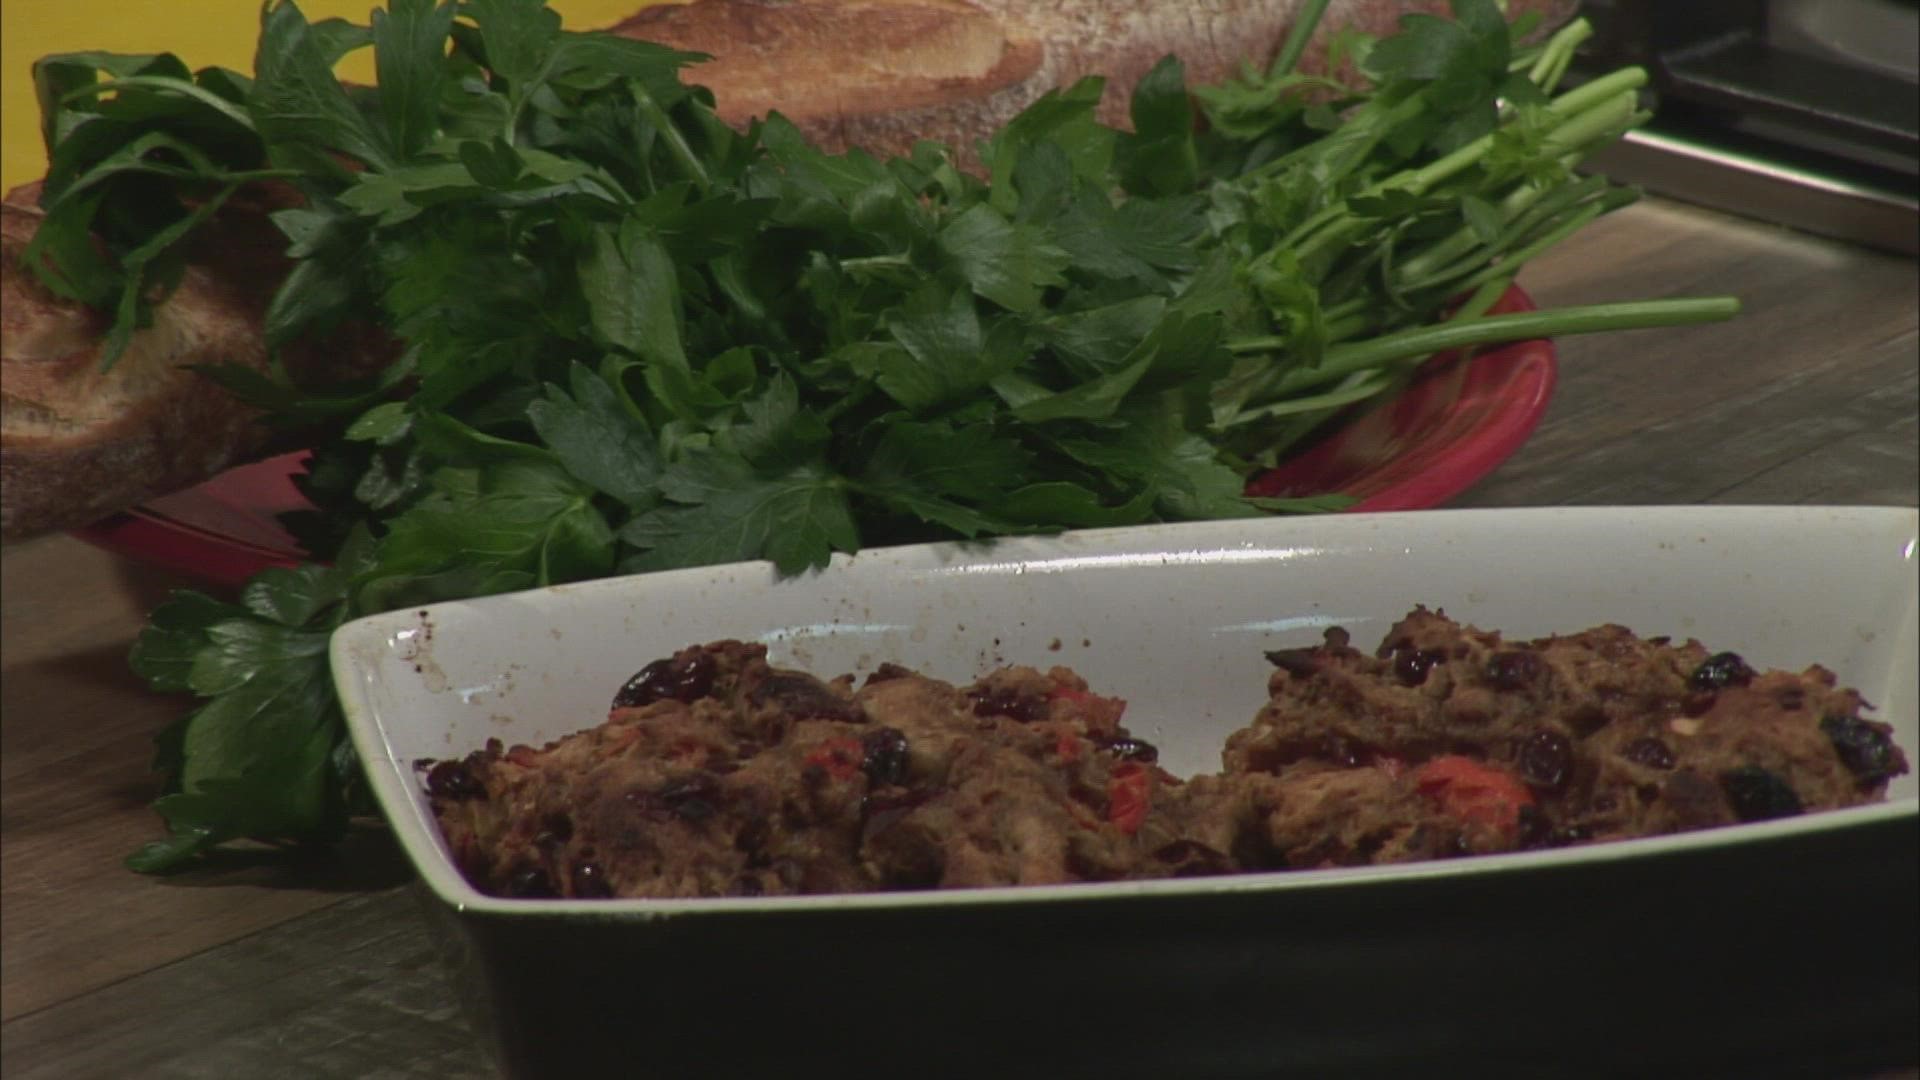 Chef Lynn Archer shares a recipe that tastes good and is affordable.